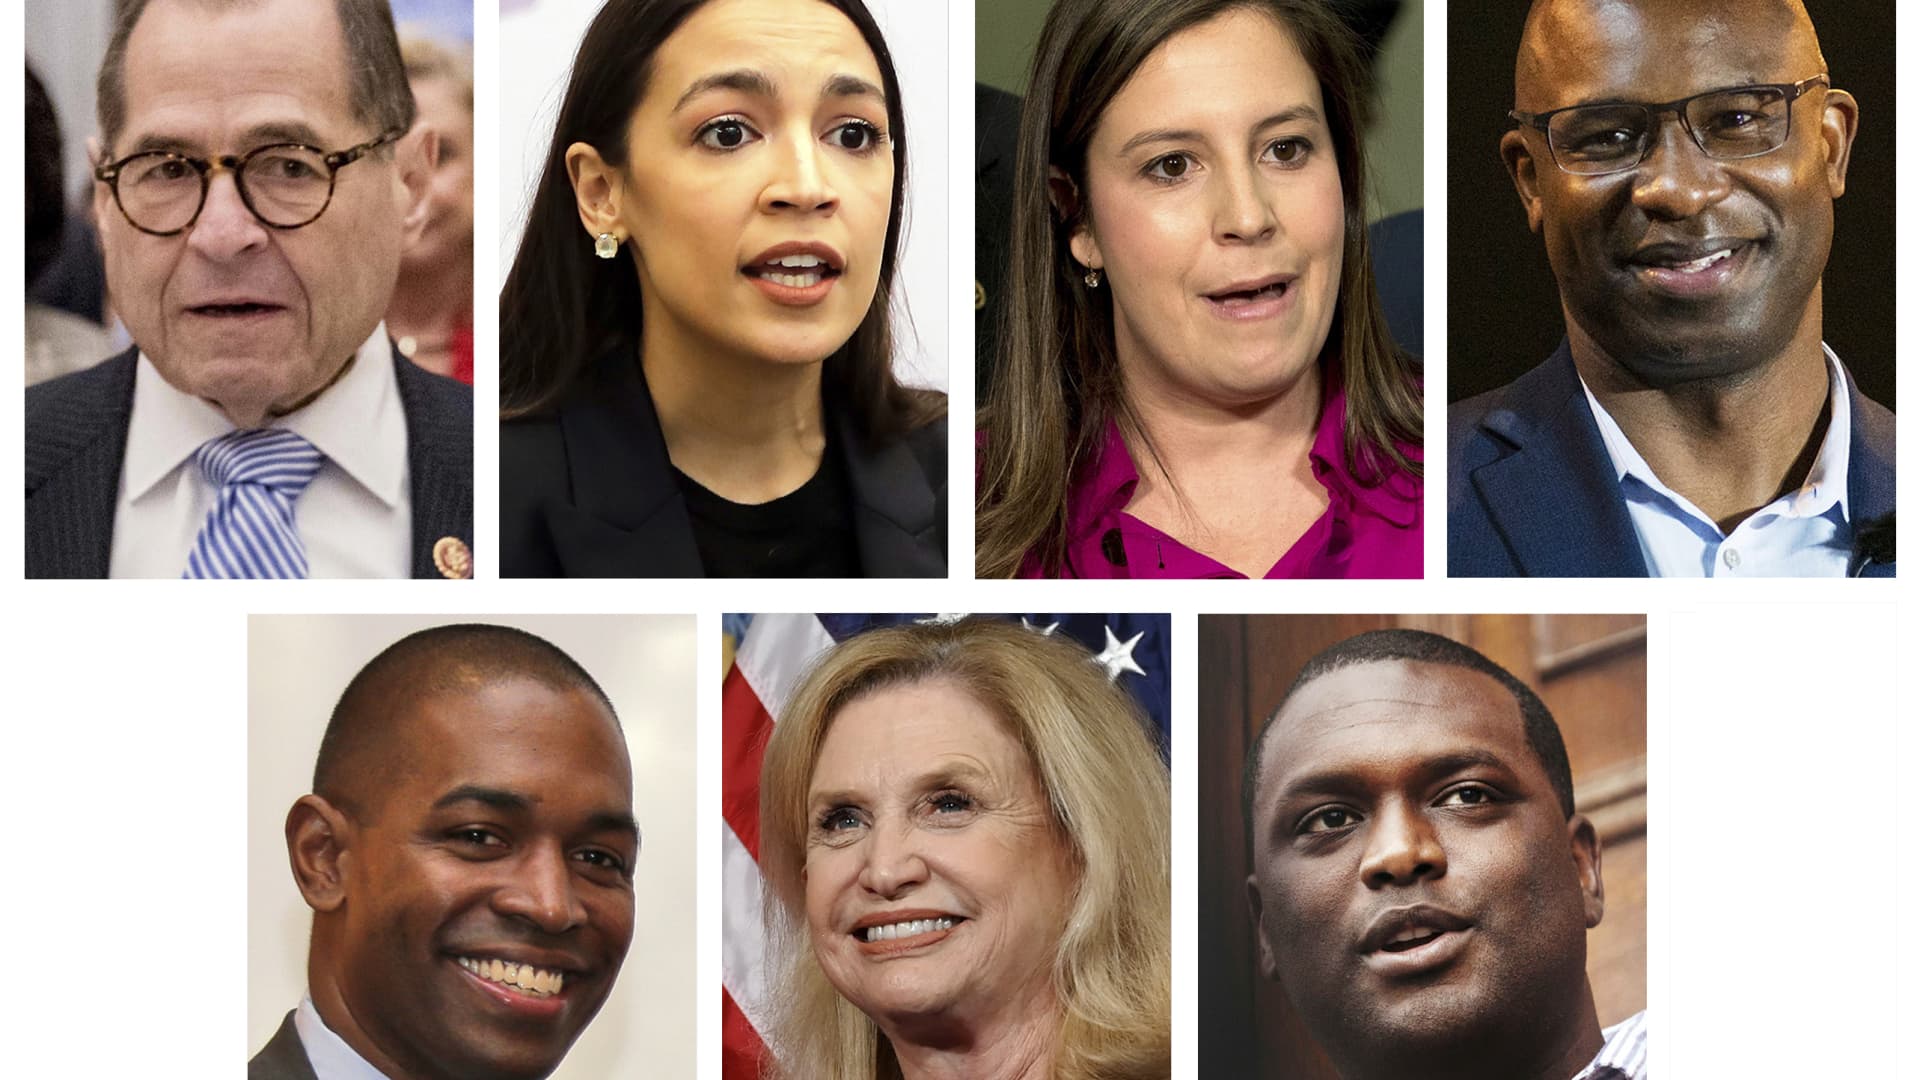 This combo of file photos show New York's U.S. Representatives, top row from left, Jerrold Nadler, D-N.Y. Alexandria Ocasio-Cortez, D-NY; U.S. Rep. Elise Stefanik, R-NY; and U.S. Rep. Jamaal Bowman, D-NY. Bottom row, from left, U.S. Rep. Antonio Delgado, D-NY; U.S. Rep. Carolyn Maloney, D-NY; and U.S. Rep. Mondaire Jones, D-NY. Multiple members of New York's congressional delegation on Friday, March 12, 2021, called on Gov. Andrew Cuomo to resign.